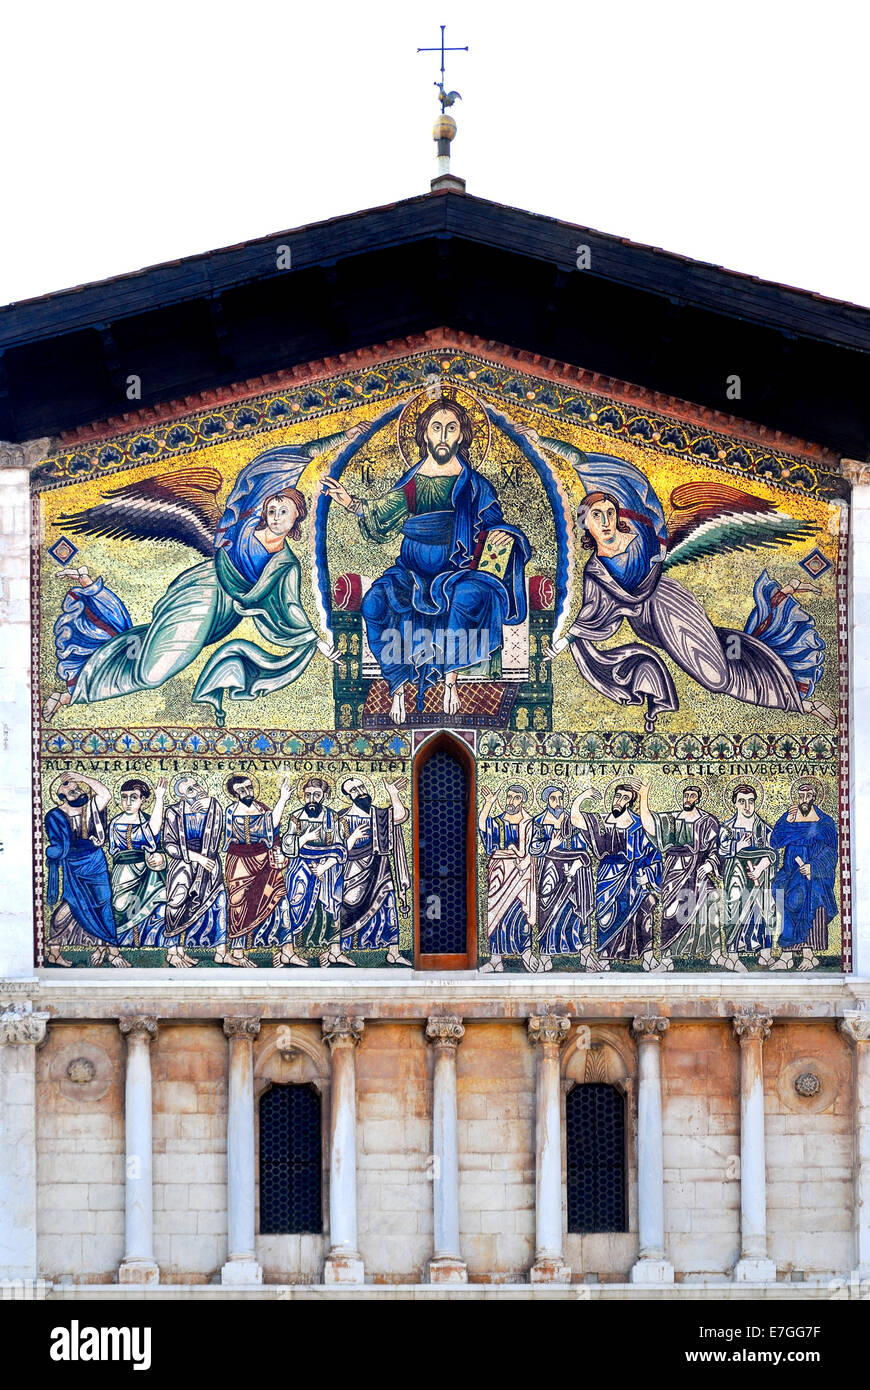 Lucca, Tuscany, Italy. Basilica of San Frediano / Fredianus. 13C mosaic depicting the Ascension of Christ Stock Photo